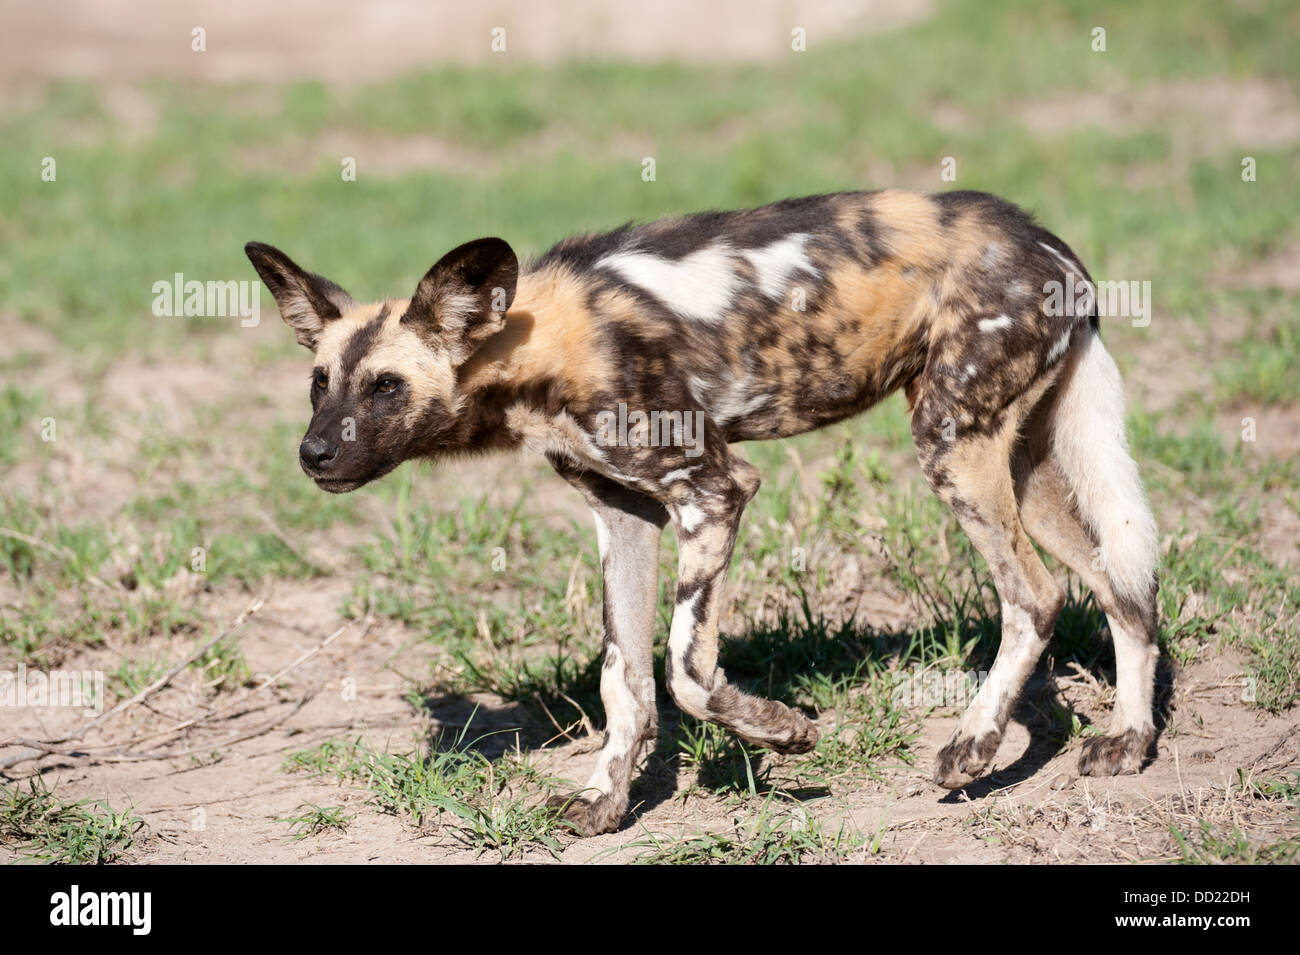 Cane selvatico (Lycaon pictus), Madikwe Game Reserve, Sud Africa Foto Stock